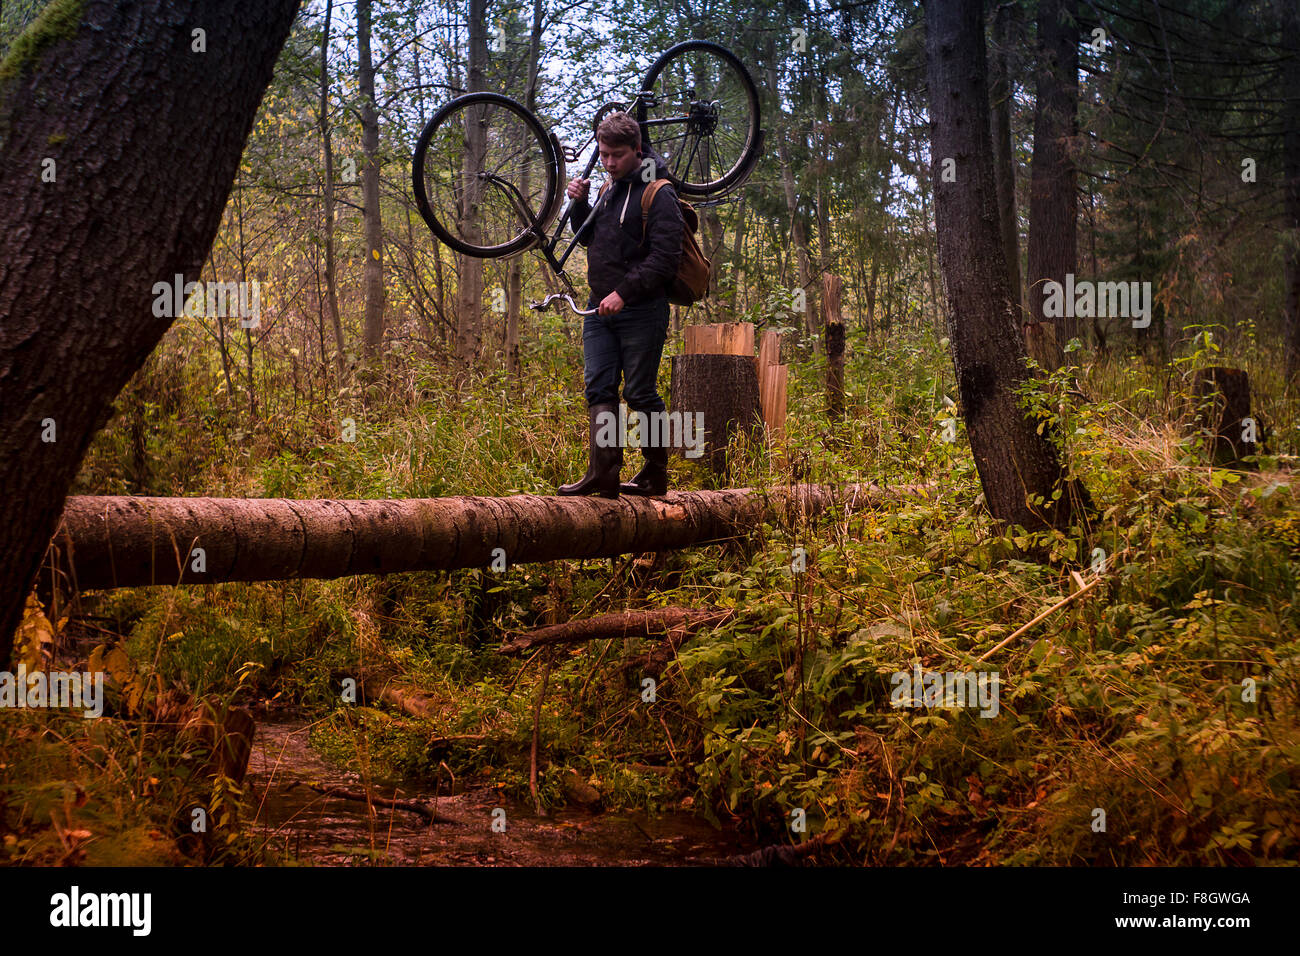 Caucasian man carrying bicycle on fallen tree Stock Photo